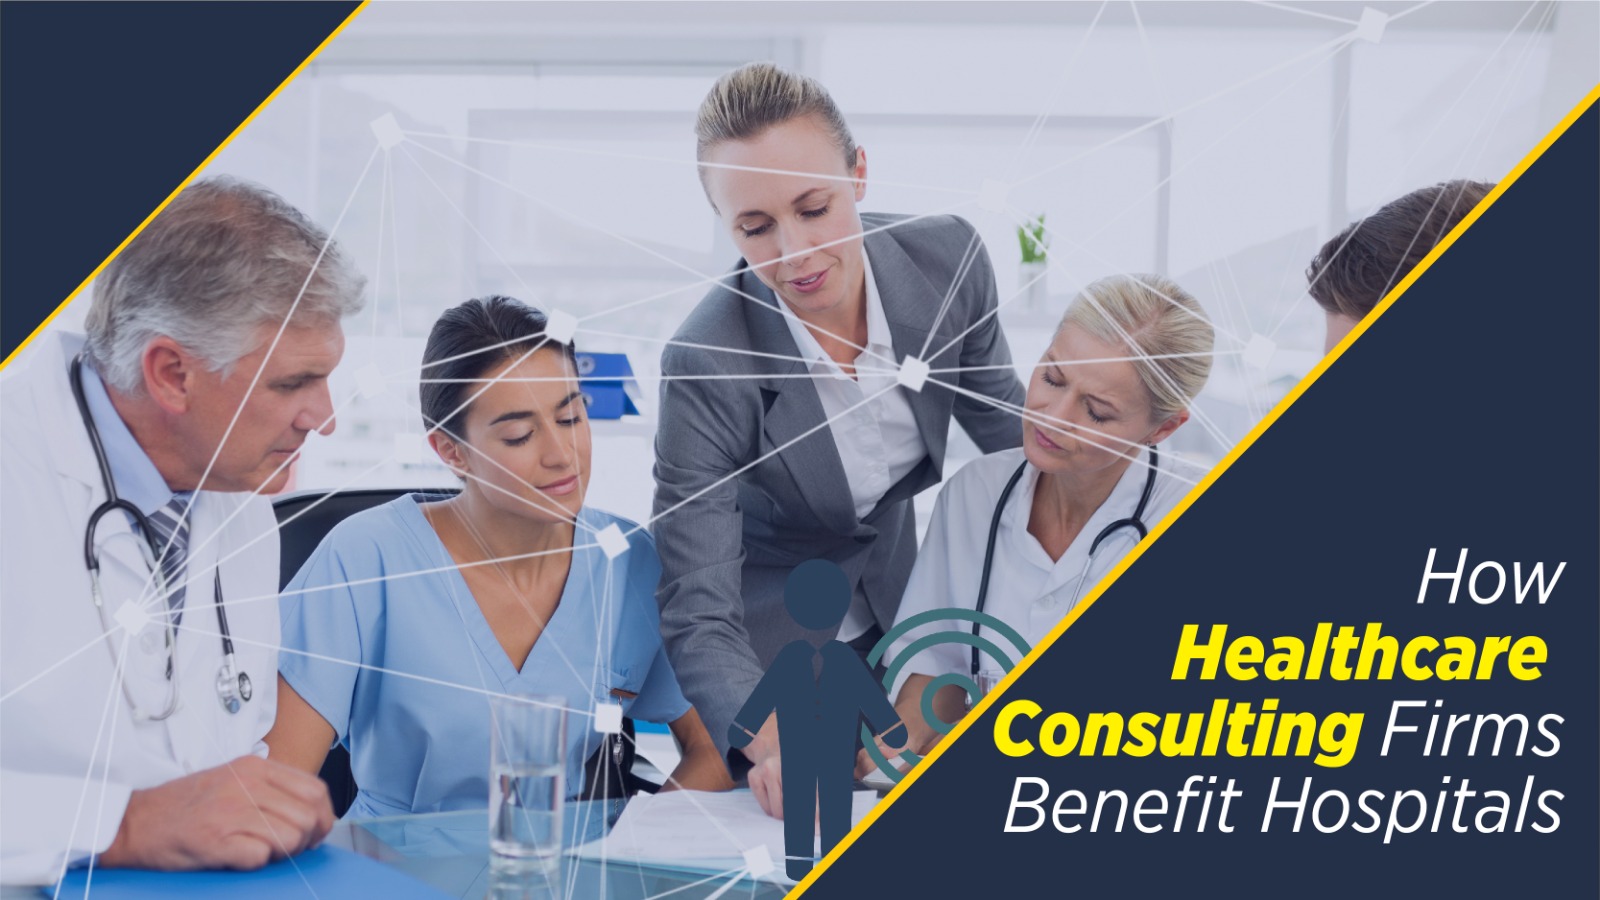 Healthcare Consulting Firms